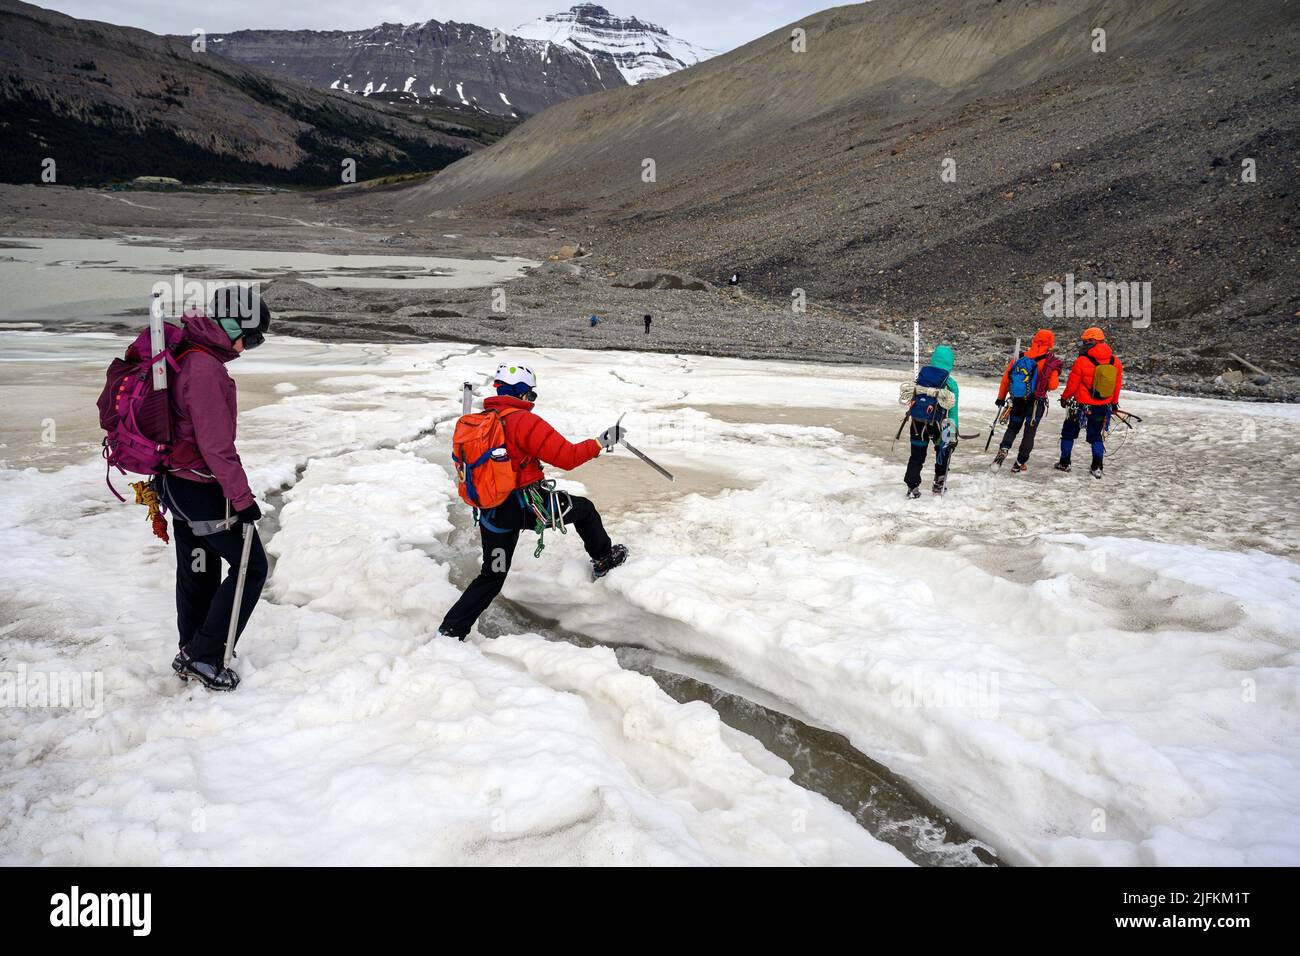 Mountaineers, ice trekkers, ice climbers, hikers and tourist people are exploring the glacier by walking on it, at Columbia Icefield, Japser National Stock Photo